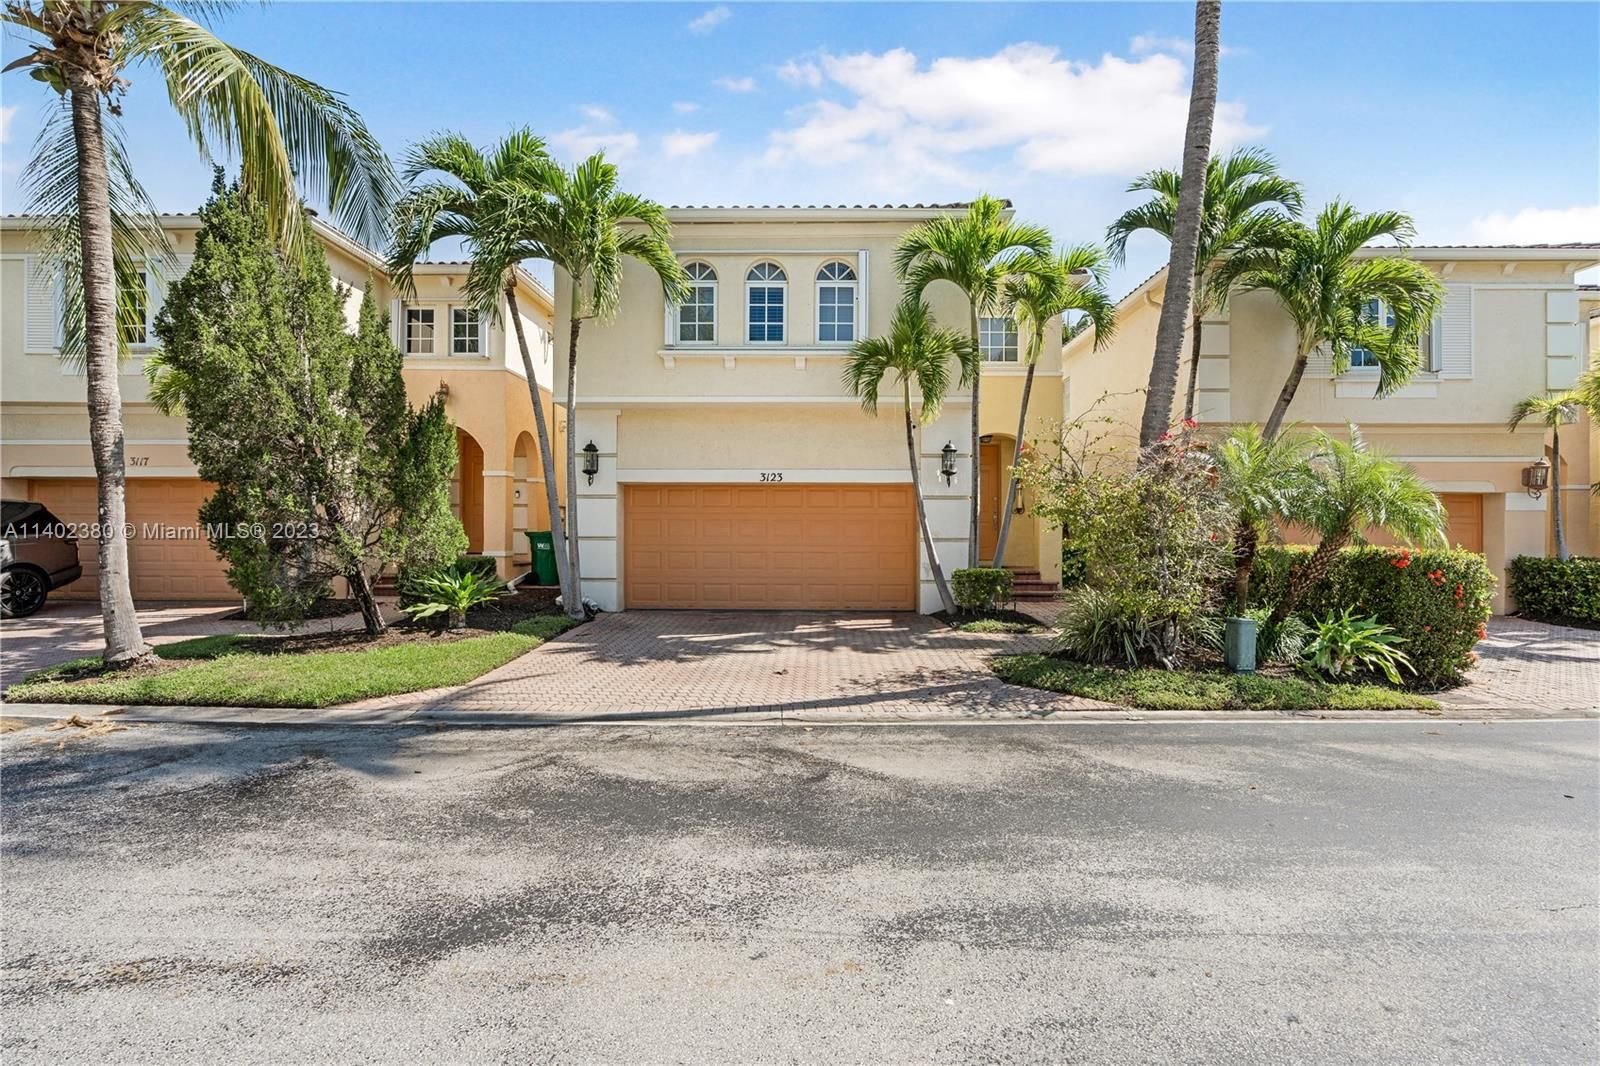 Real estate property located at 3123 210th St, Miami-Dade County, Aventura, FL